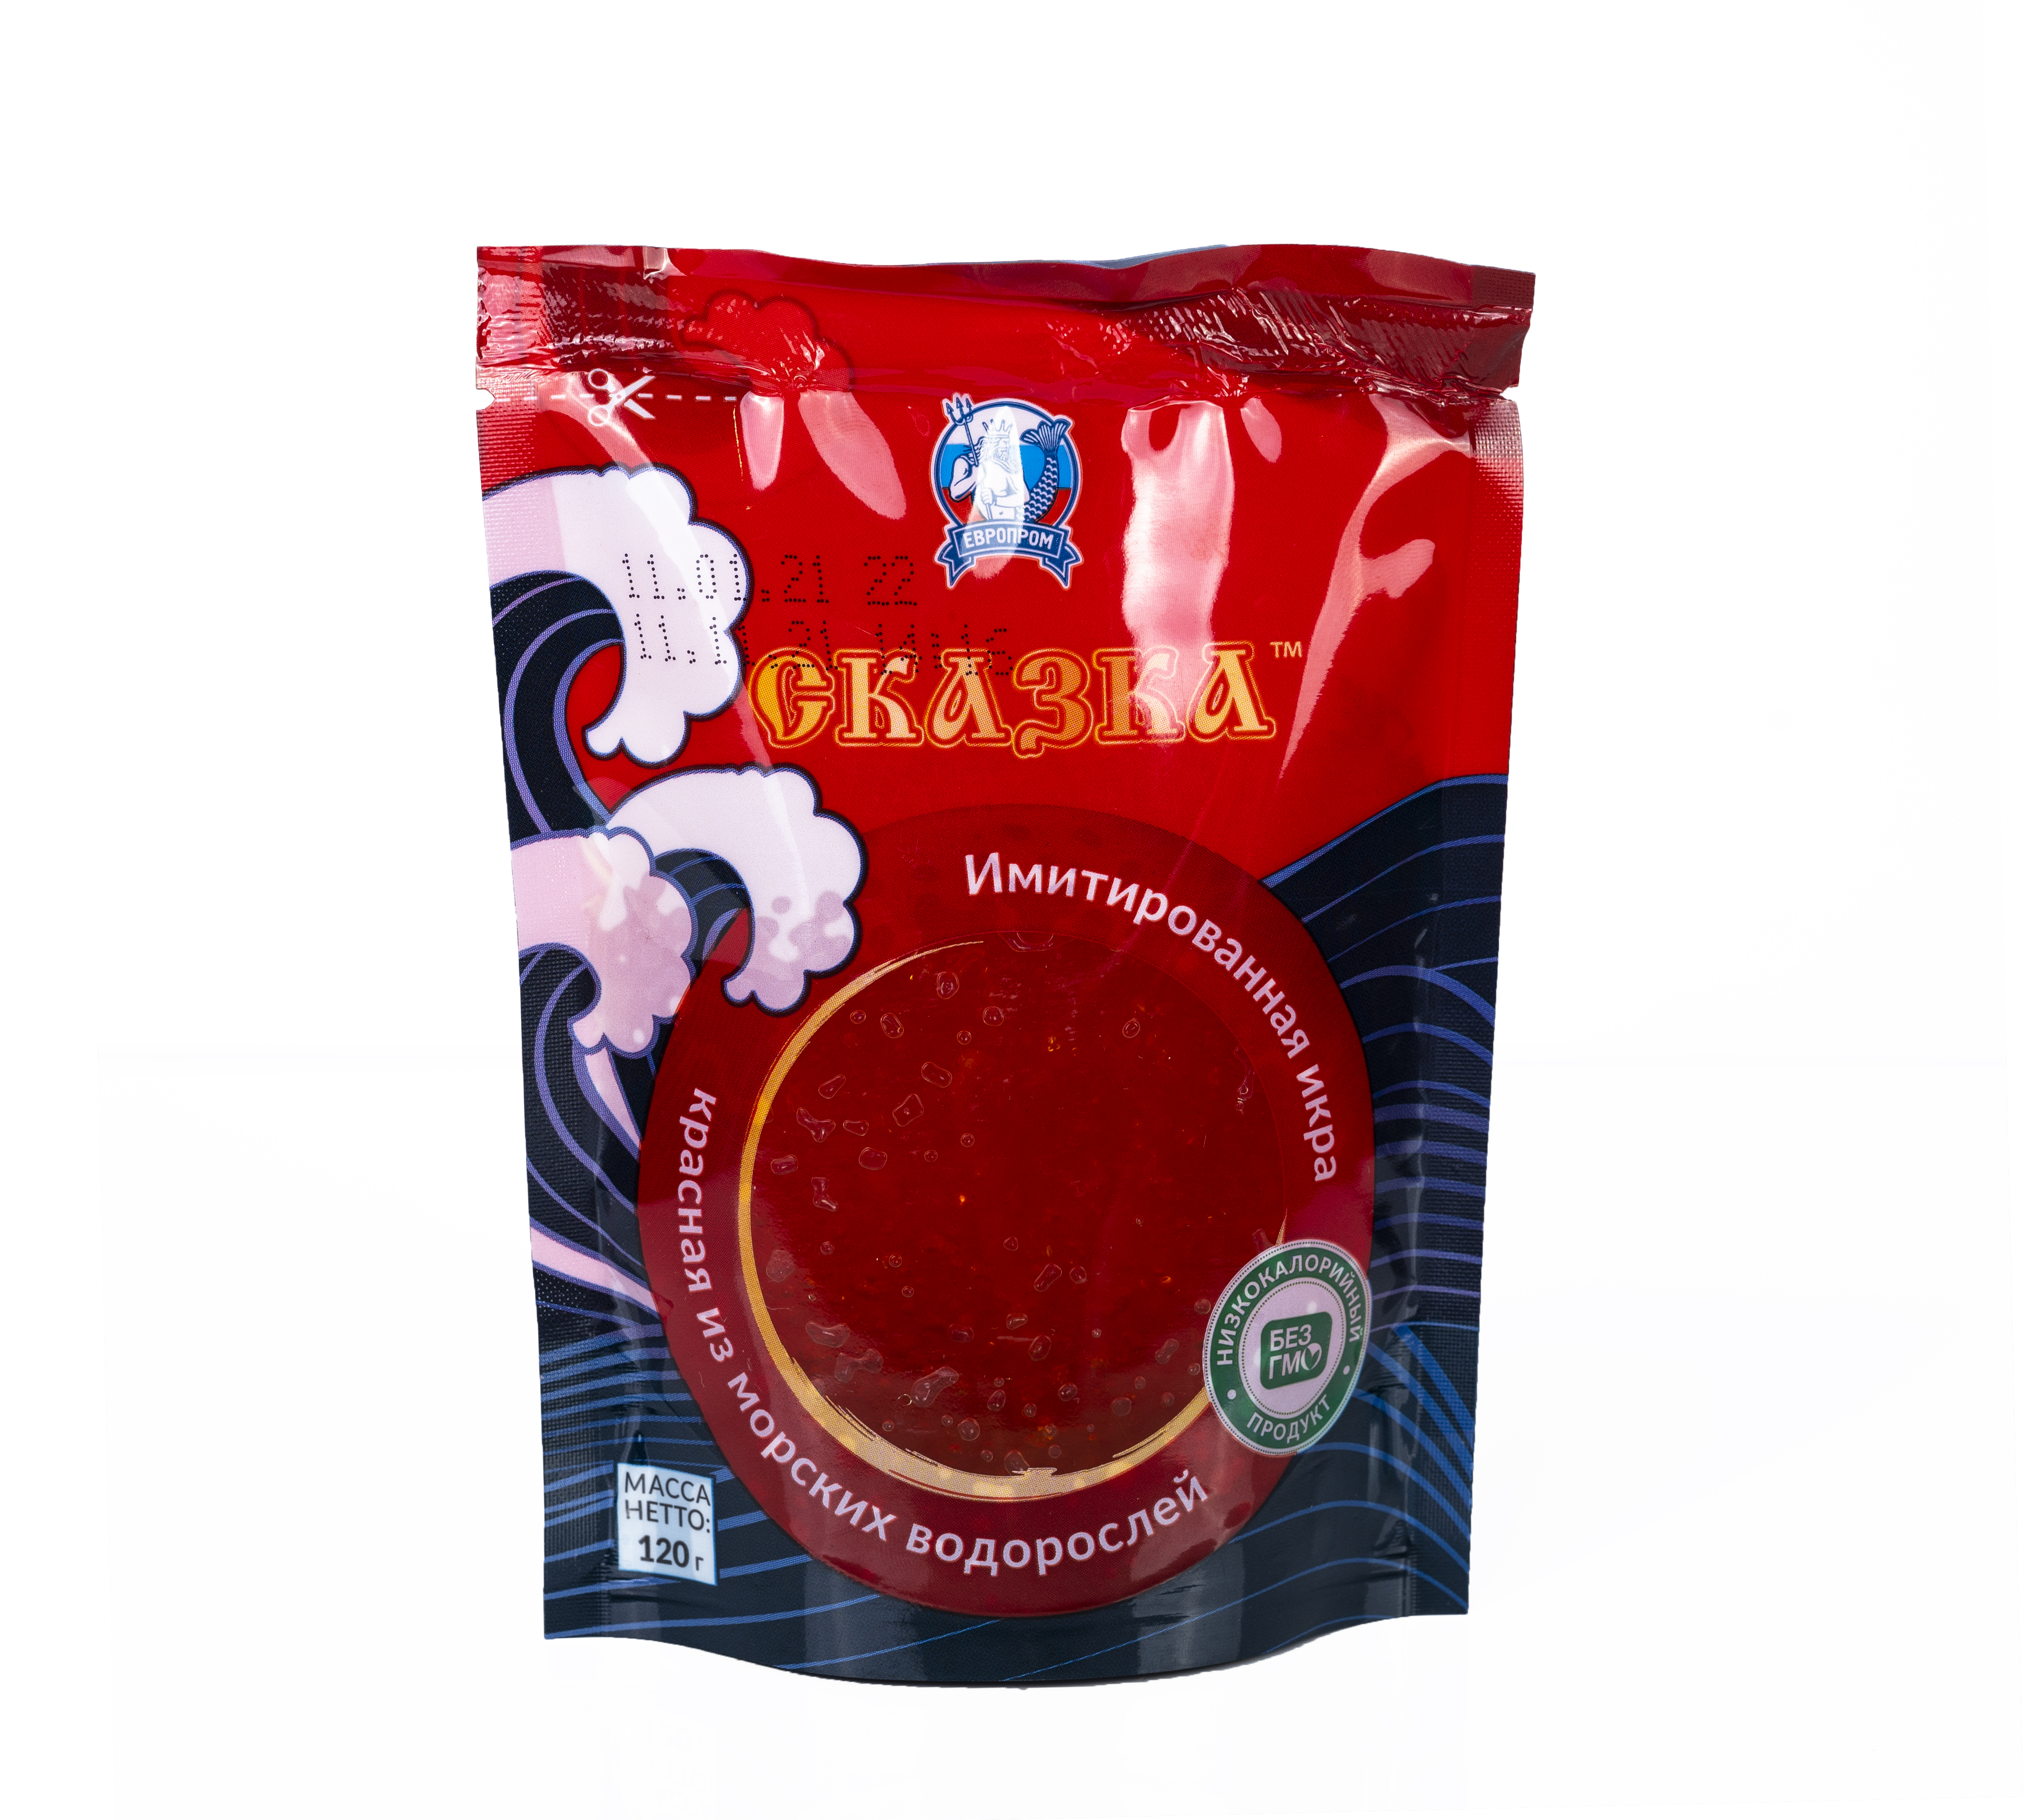 Icre rosii artificiale Scazca 120gr